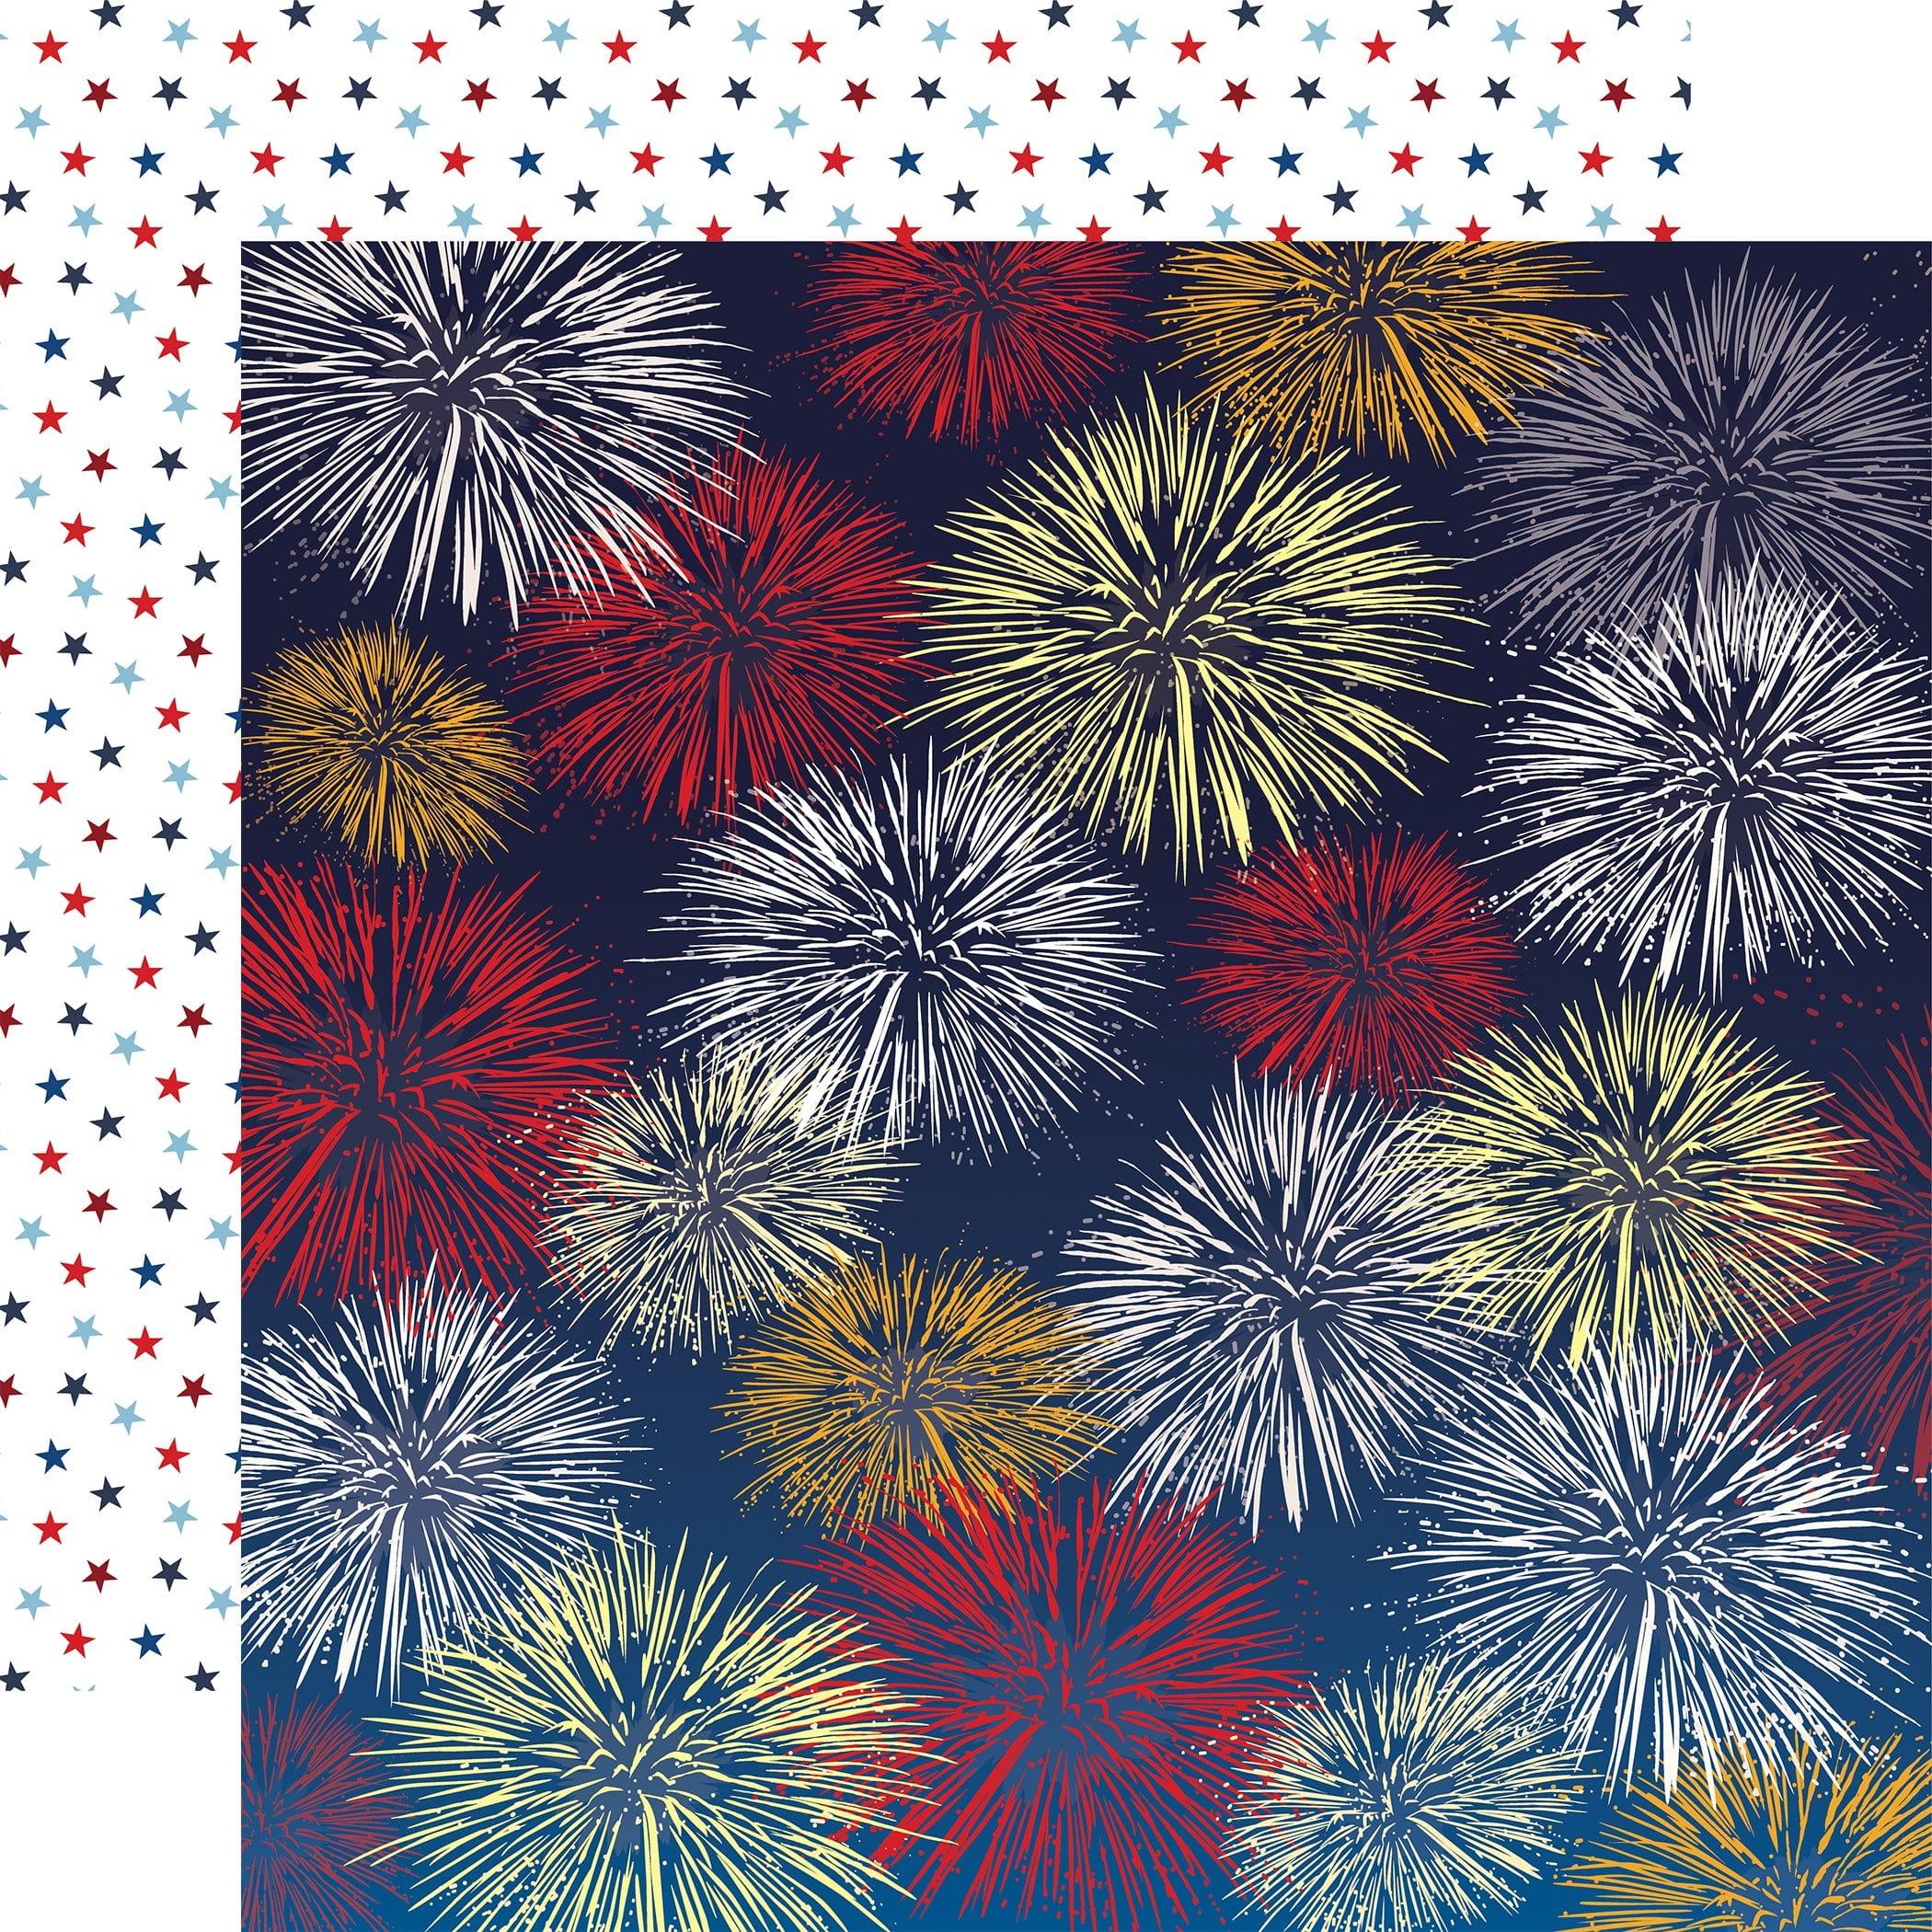 God Bless America Collection Firework Fiesta 12 x 12 Double-Sided Scrapbook Paper by Carta Bella - Scrapbook Supply Companies